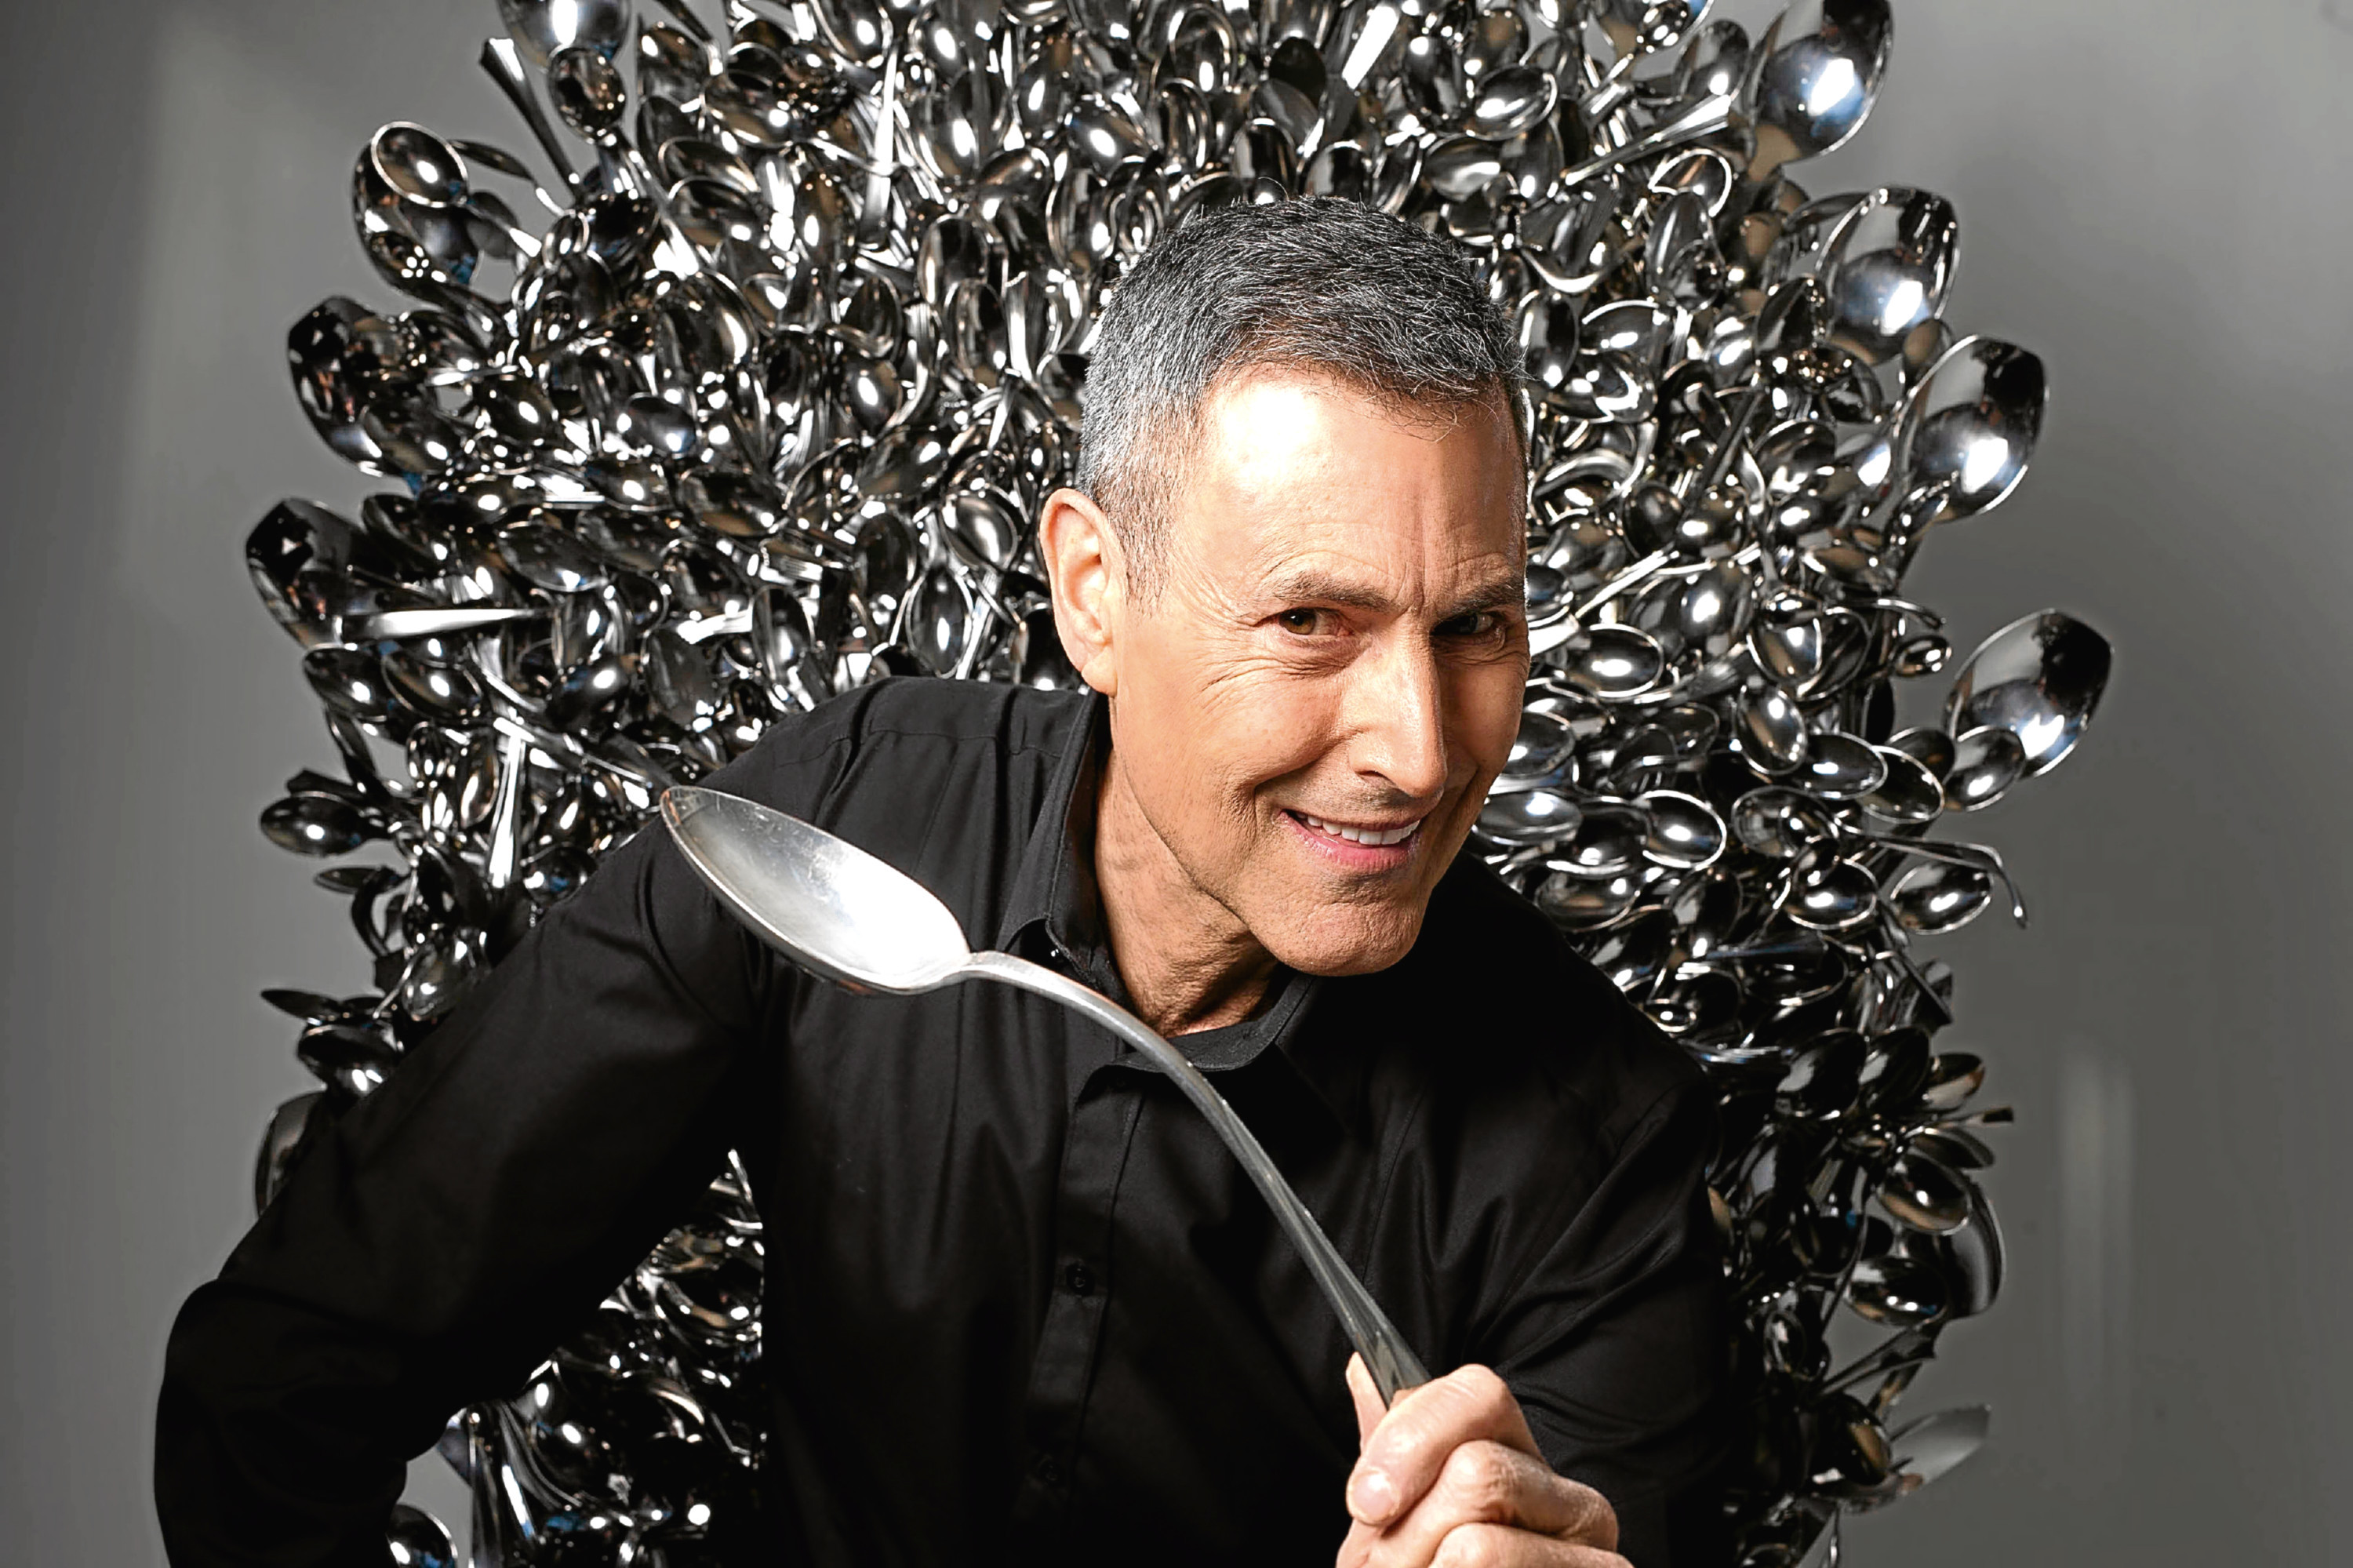 Uri Geller sits on a throne of spoons inspired by the television show Game of Thrones. (David Parry/PA Wire)